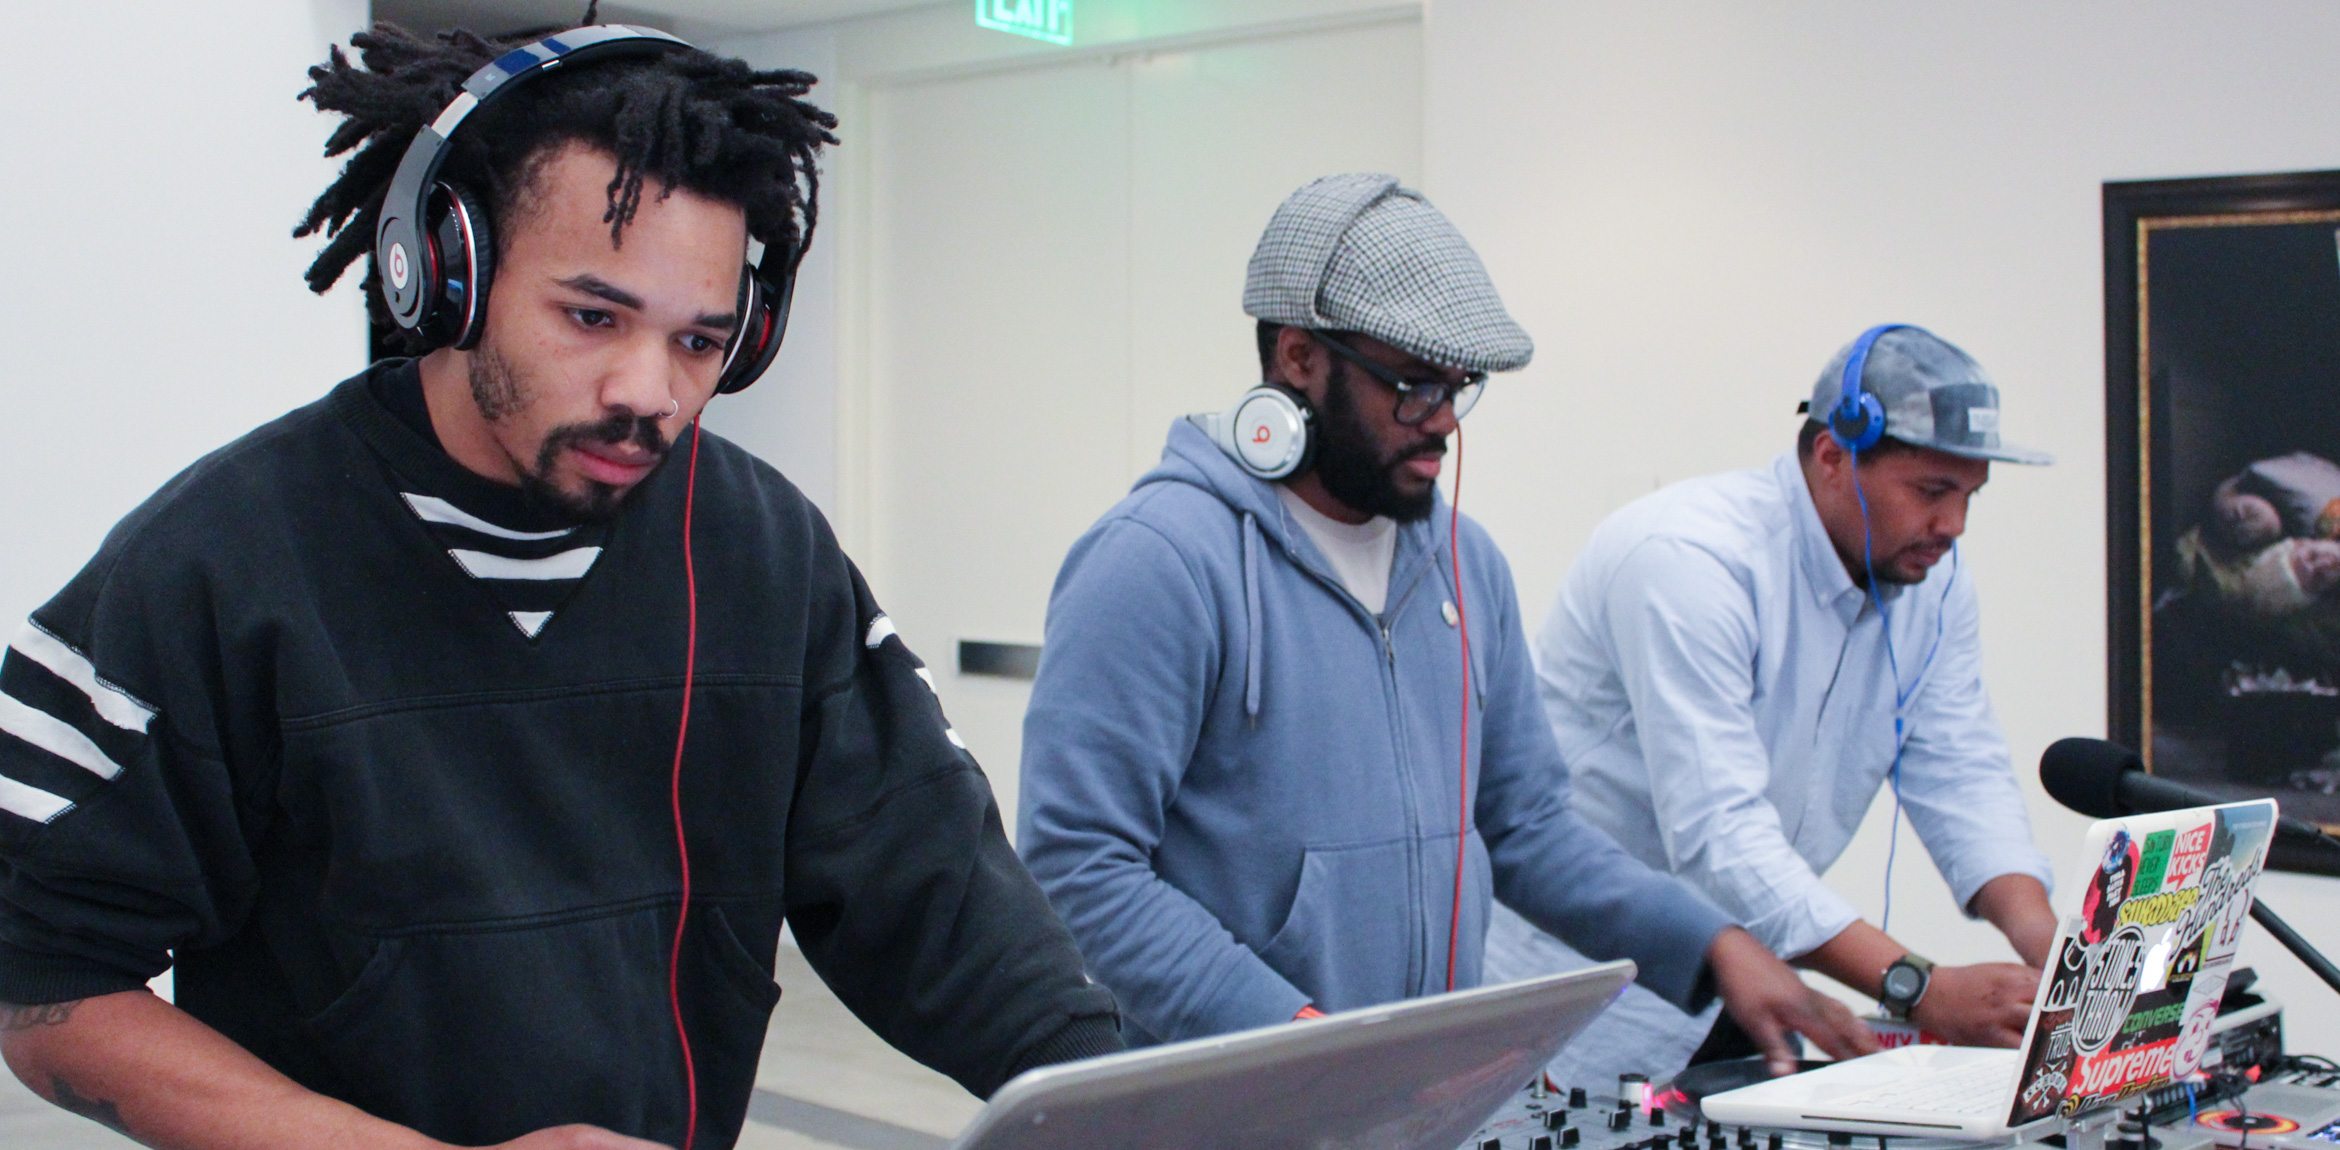 Three DJs wearing headphones are focused on their computers at a table in the Lower-Main Gallery.